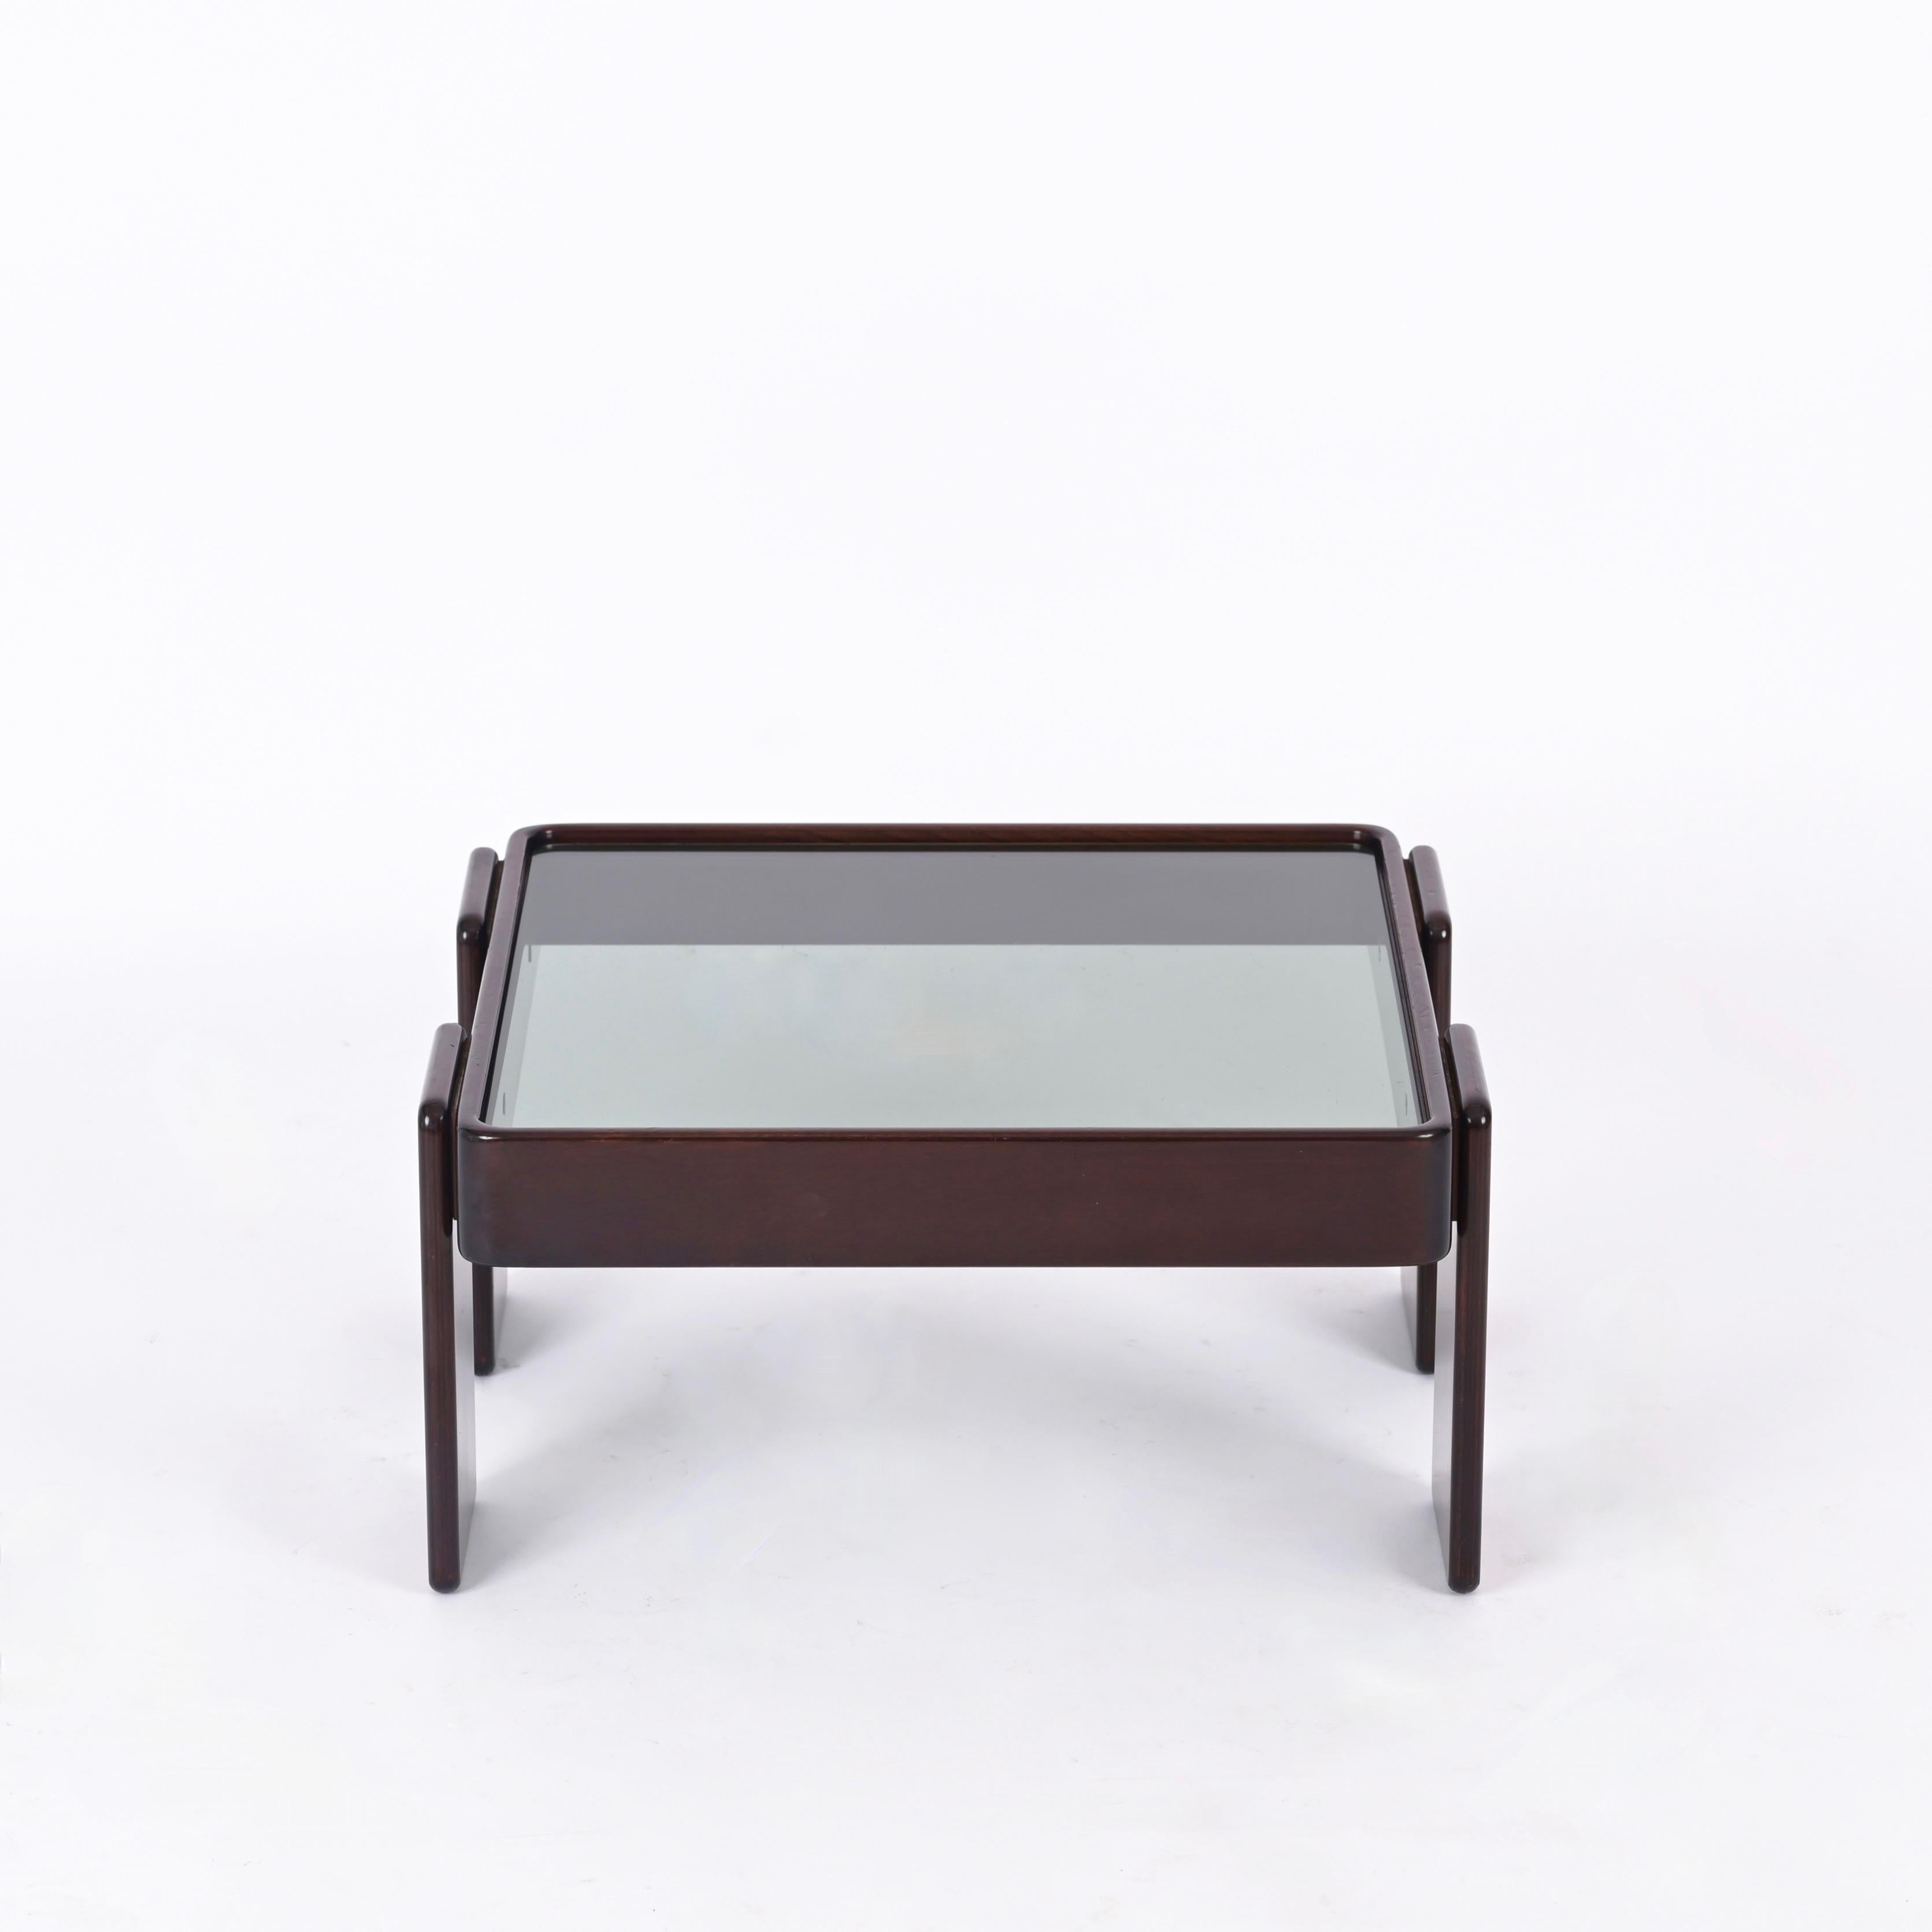 Italian Square Coffee Table with Smoked Glass by Frattini for Cassina, Italy, 1970s For Sale